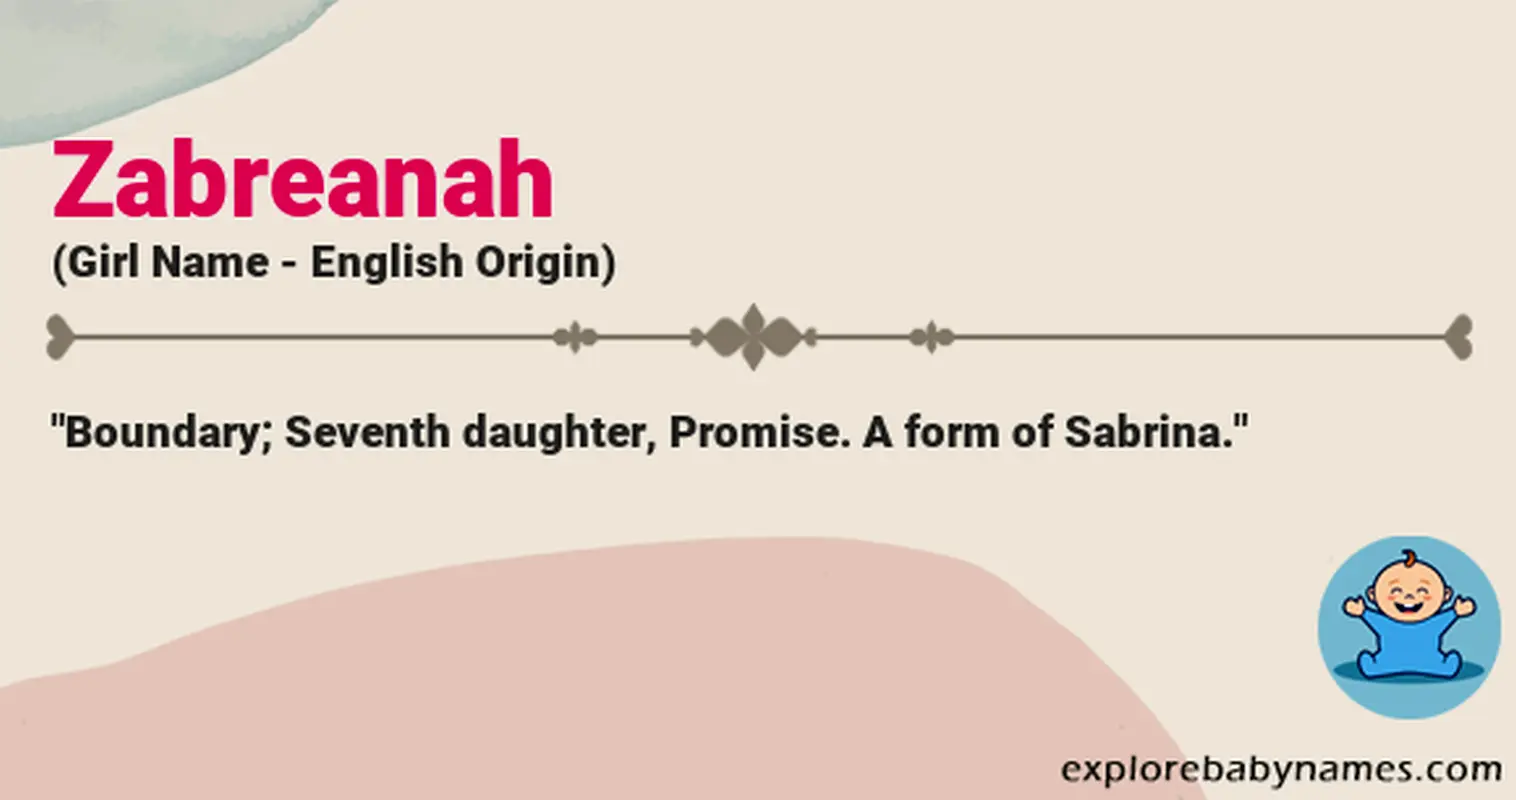 Meaning of Zabreanah